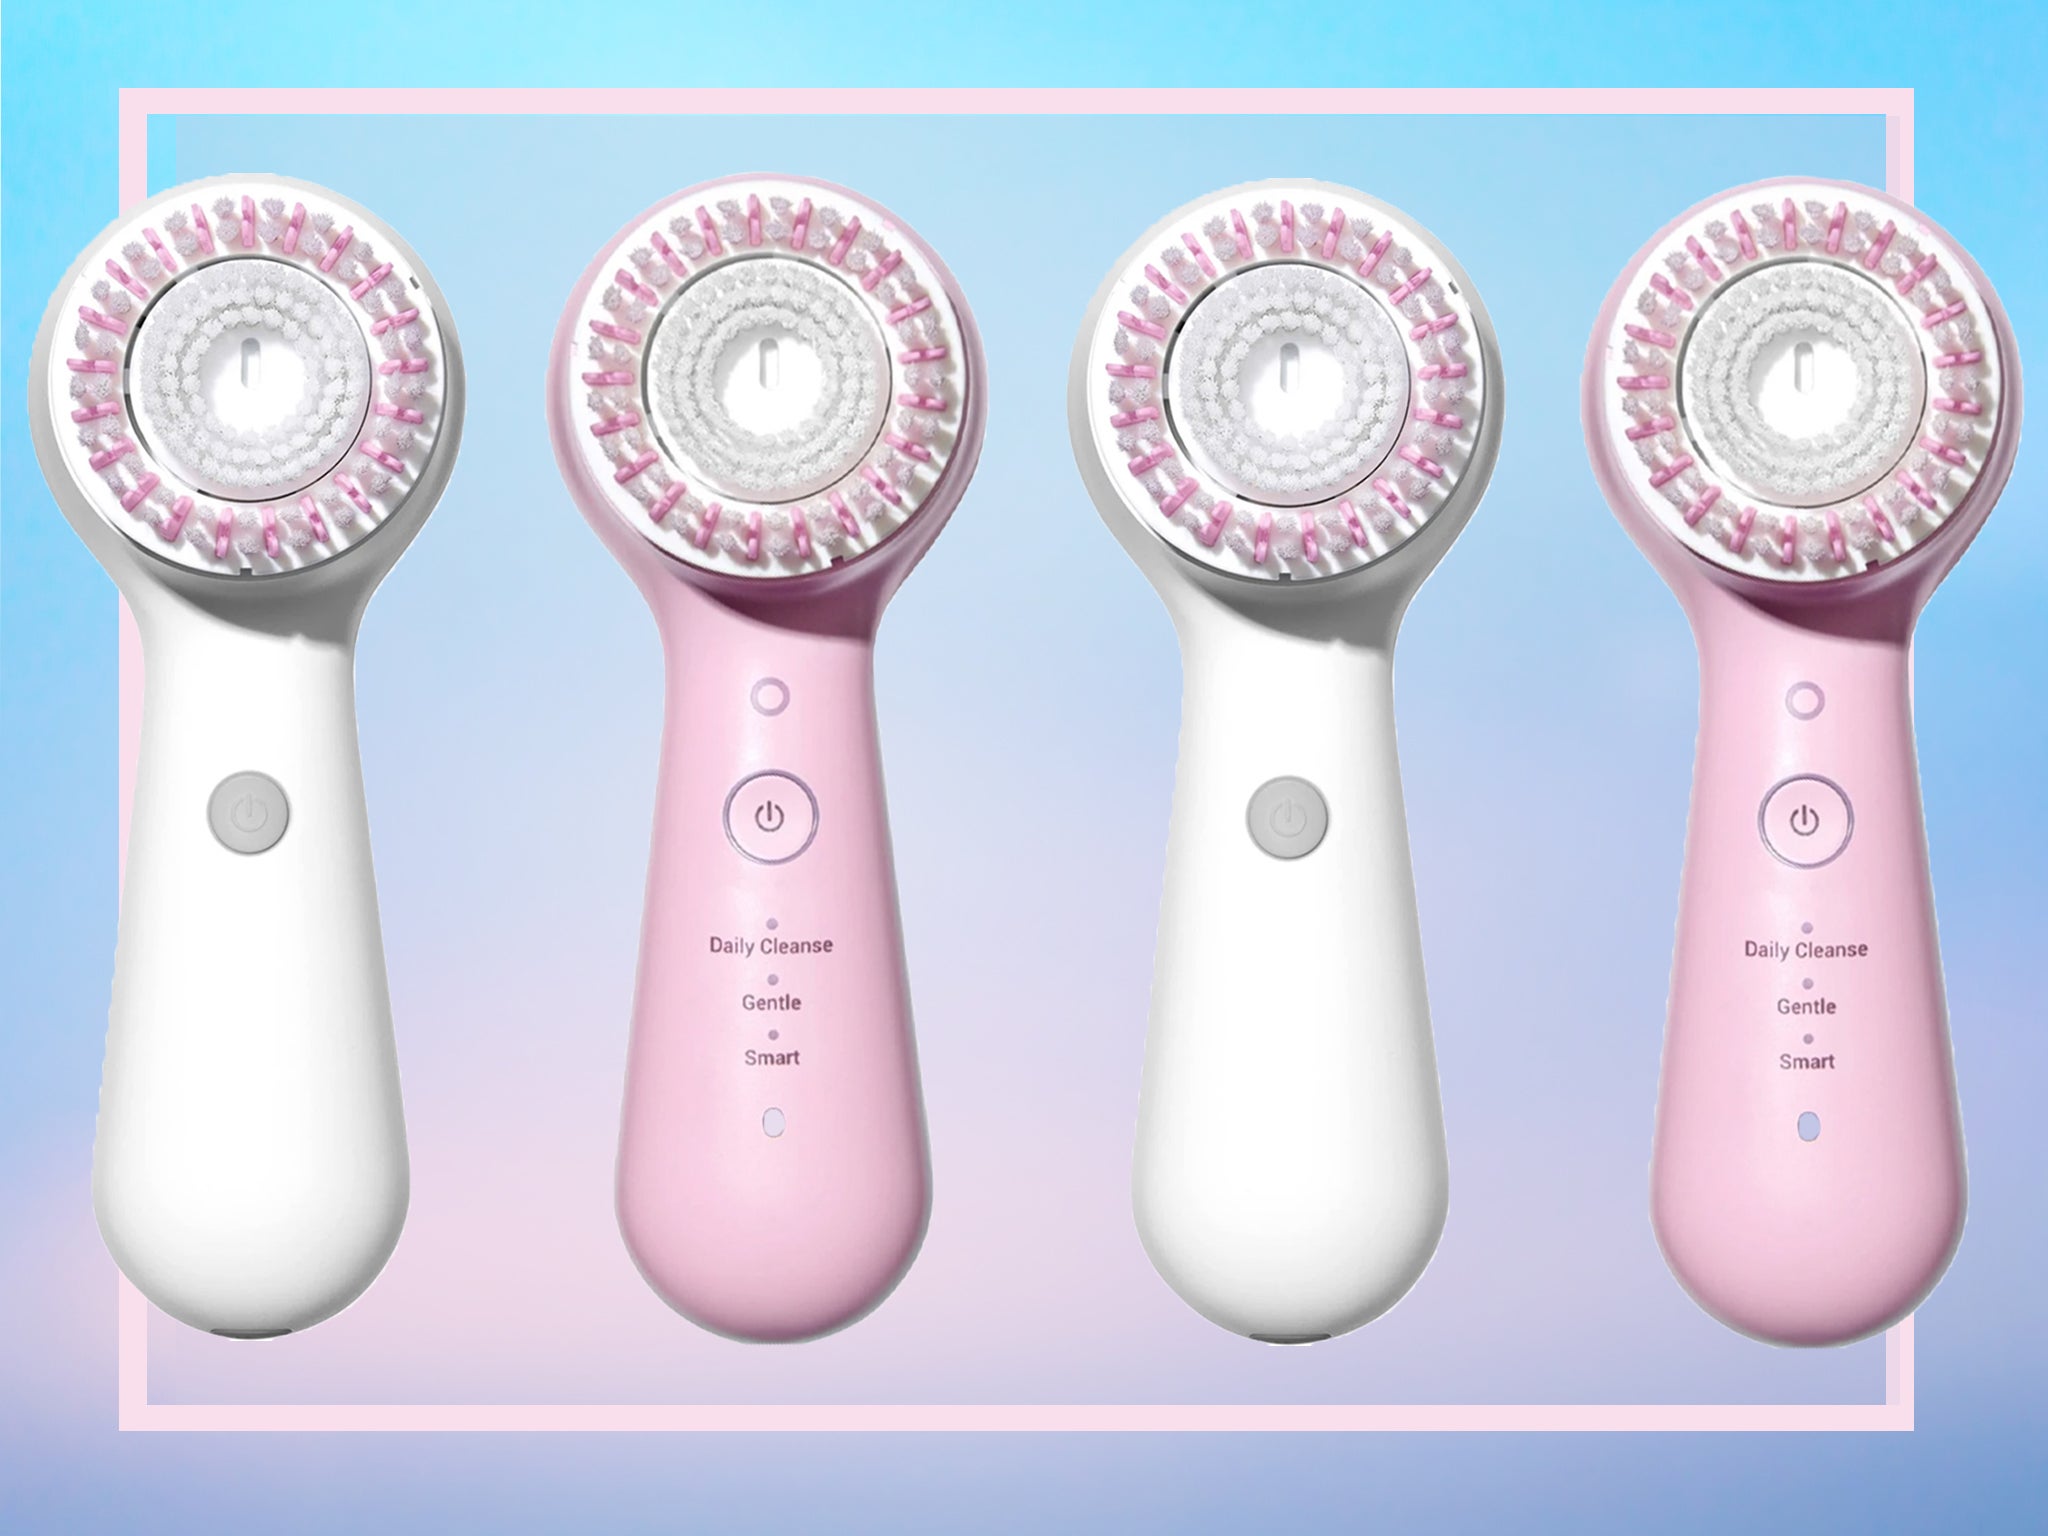 Don't miss out on big deals and discounts in the Clarisonic closing down sale